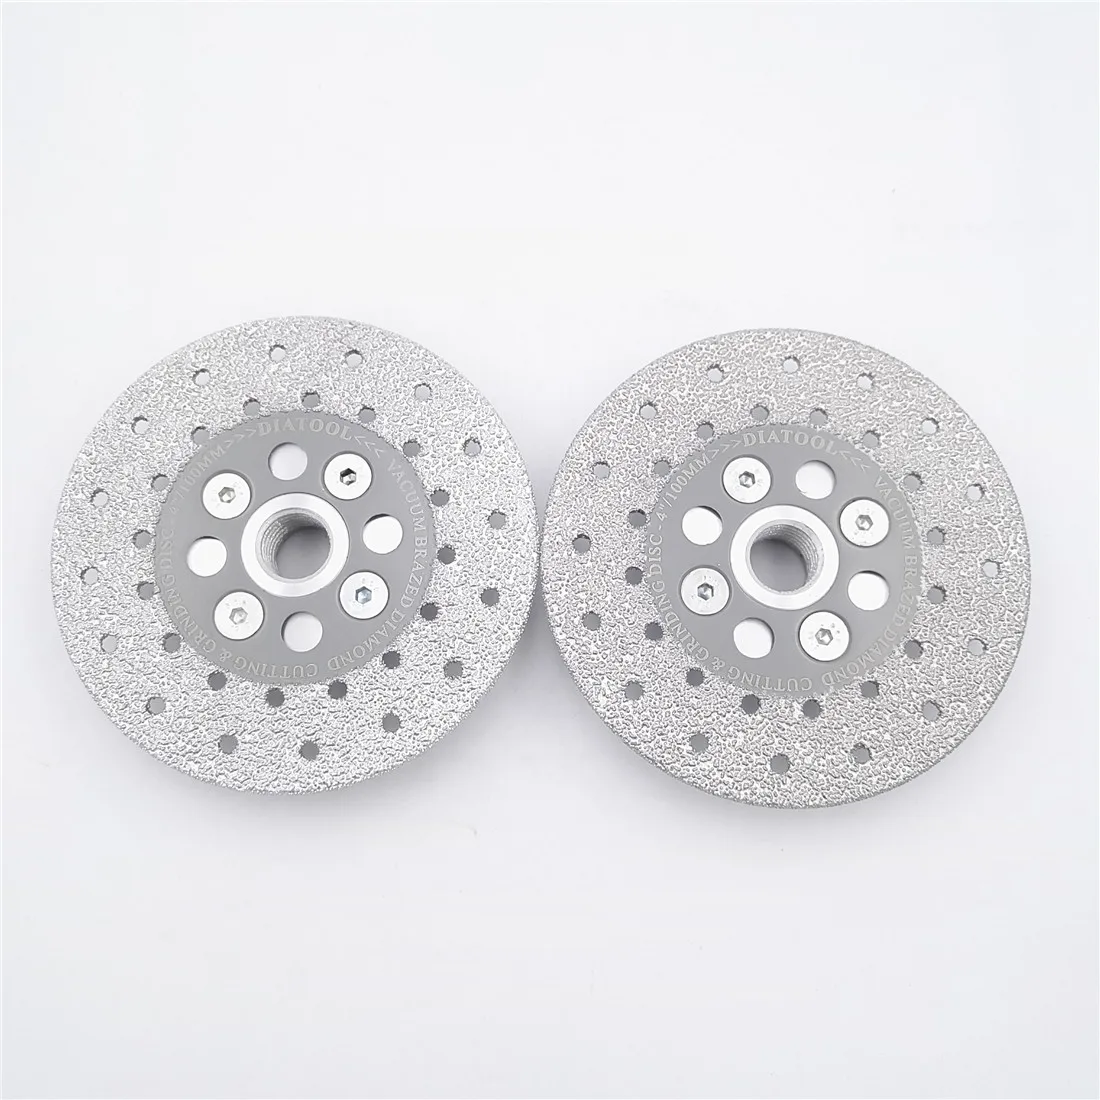 DIATOOL 2pcs Premium Quality Diameter 4"/100mm Double Sided Vacuum Brazed Diamond Cutting & Grinding Disc With 5/8-11 Flange